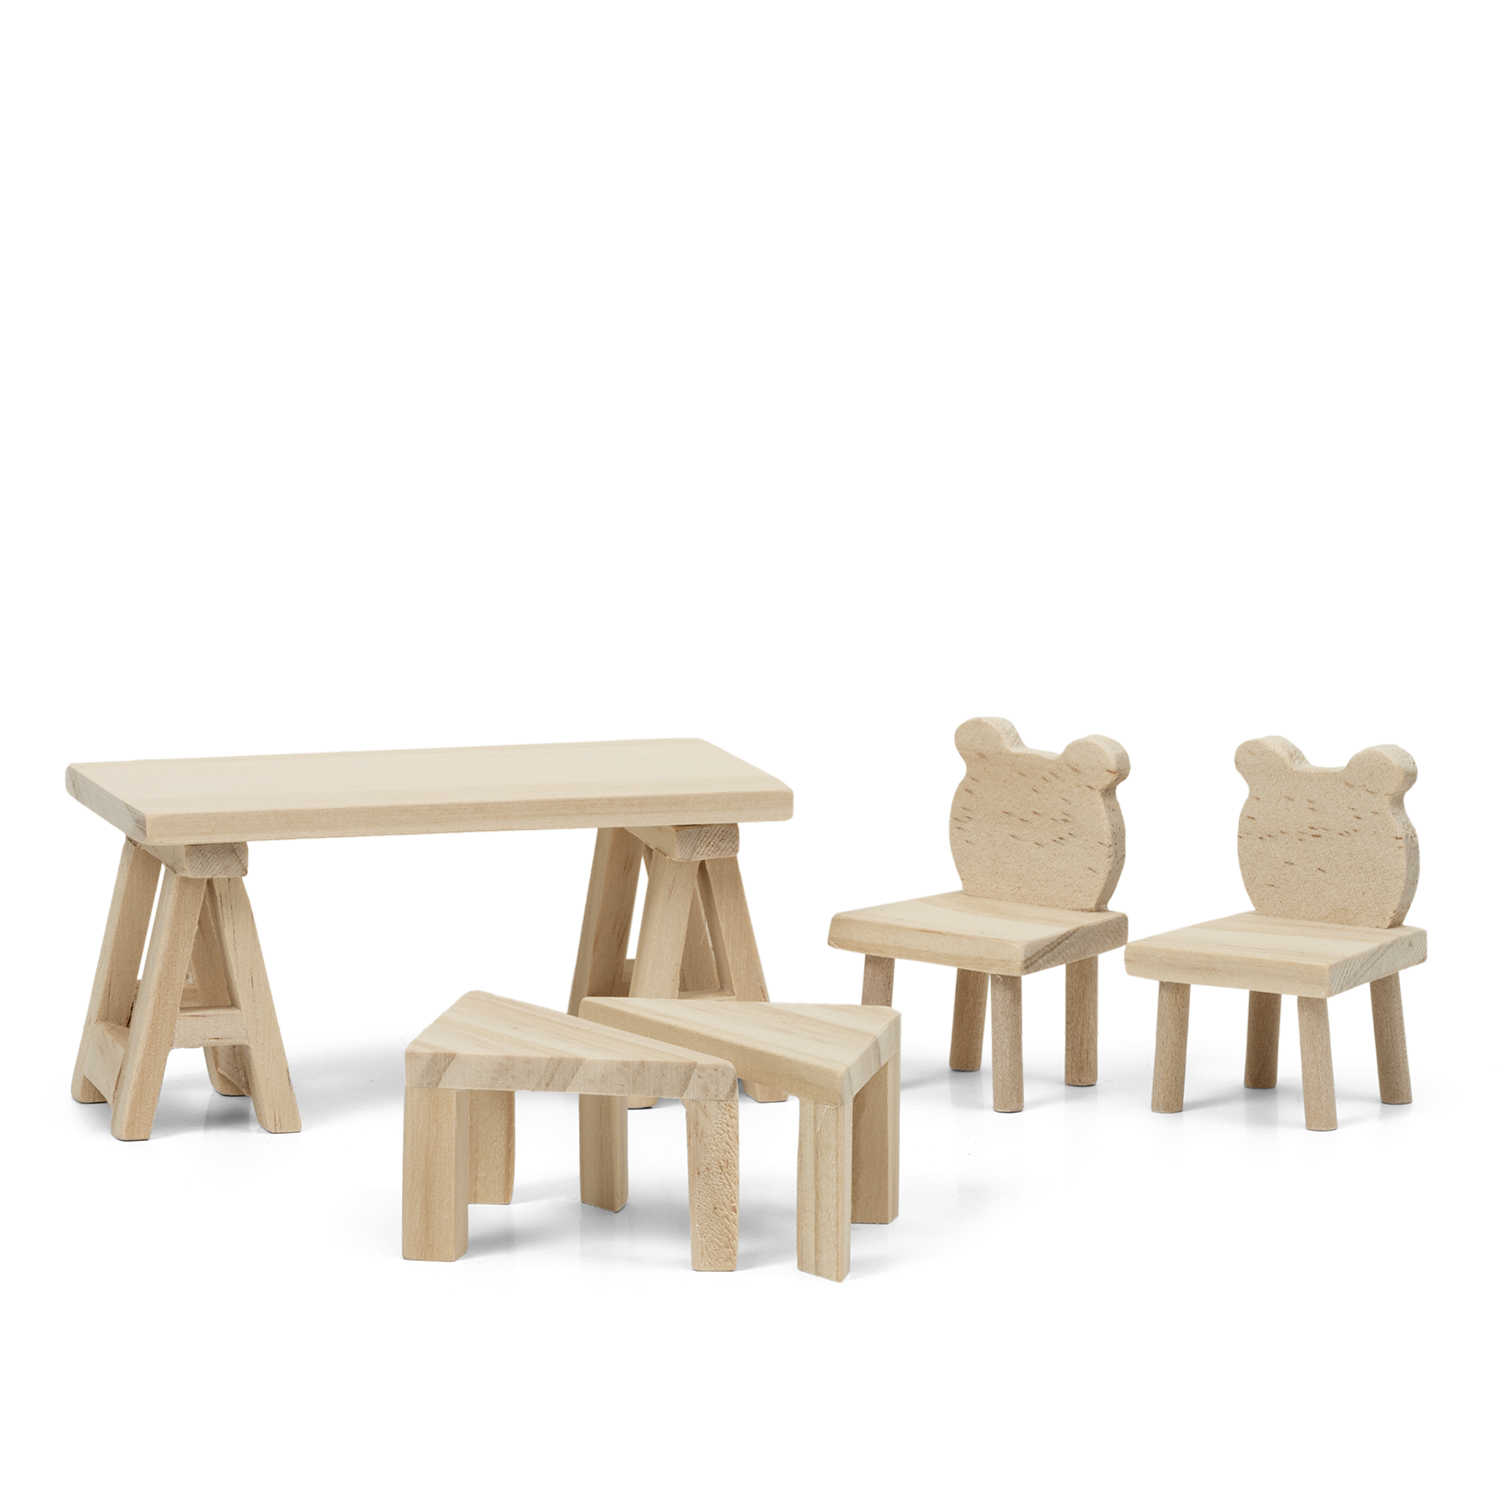 Arts and Craft lundby dollhouse furniture table & chairs natural wood